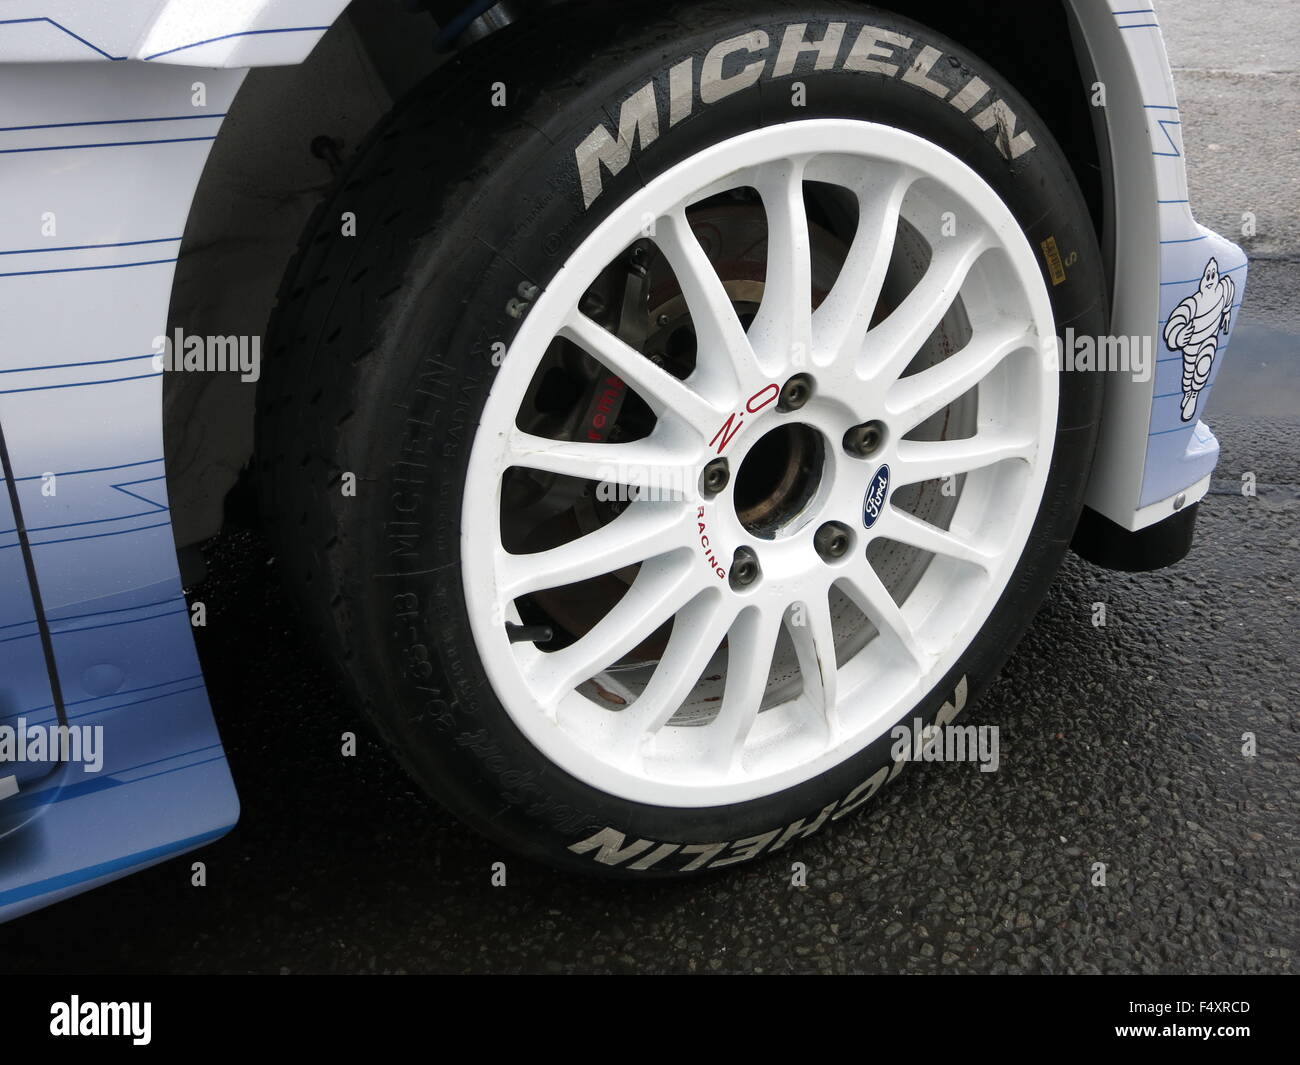 Ford Fiesta RS WRC world rally Car 2015 driven by Elfyn Evans and co-driver  Daniel Barritt shown at donnington park race circuit - showing close up  detail of alloy wheel in white